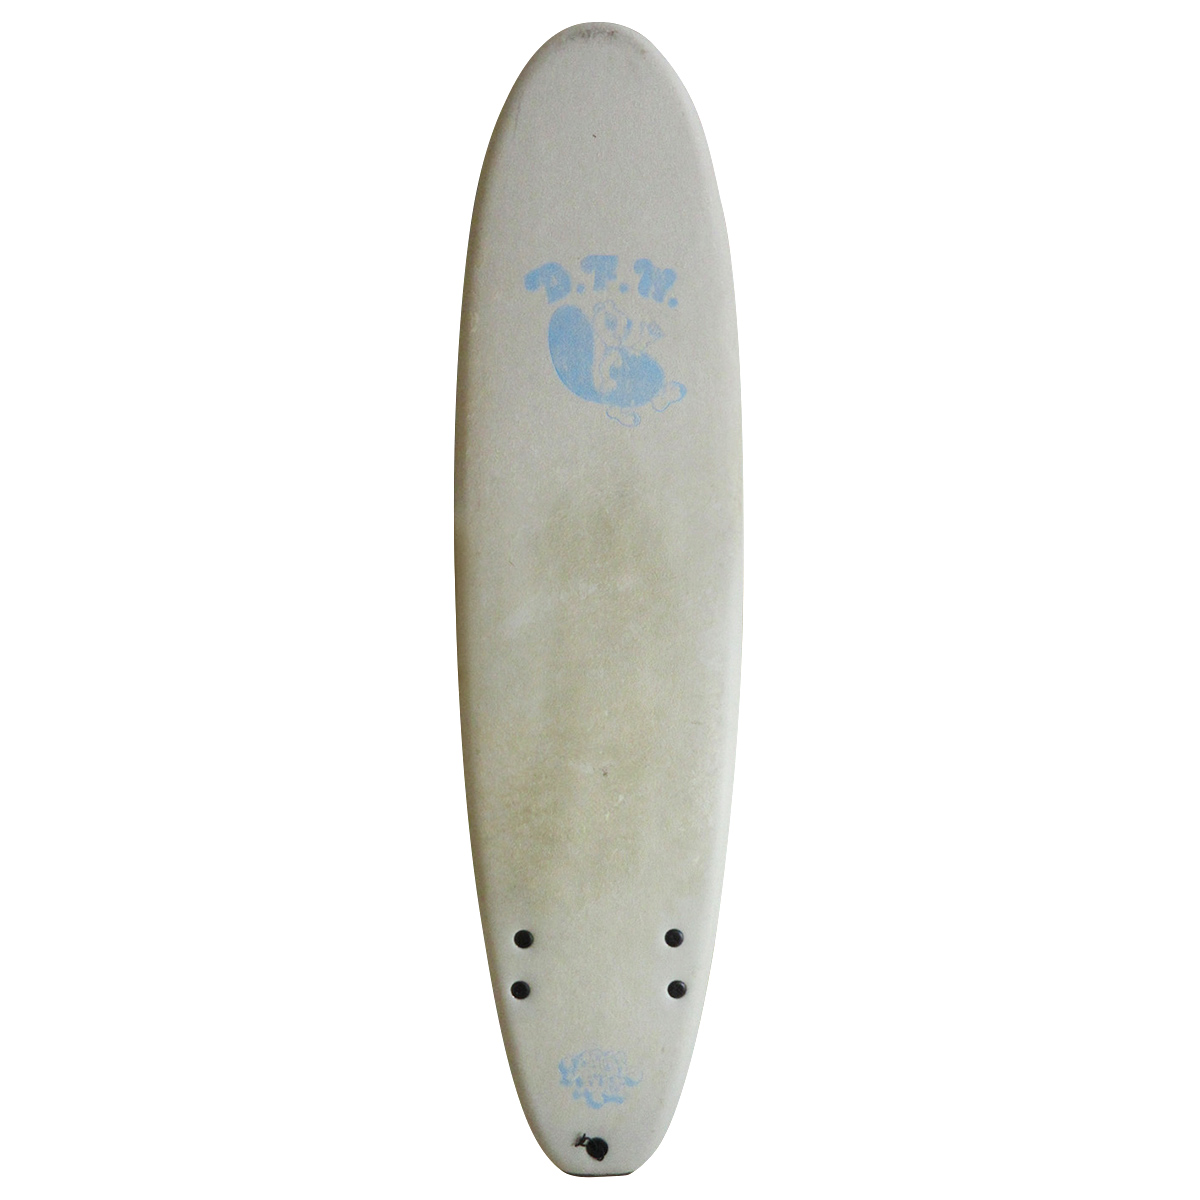 CATCH SURF  / Barry McGee DFW Edition 7.0 Side bite fin